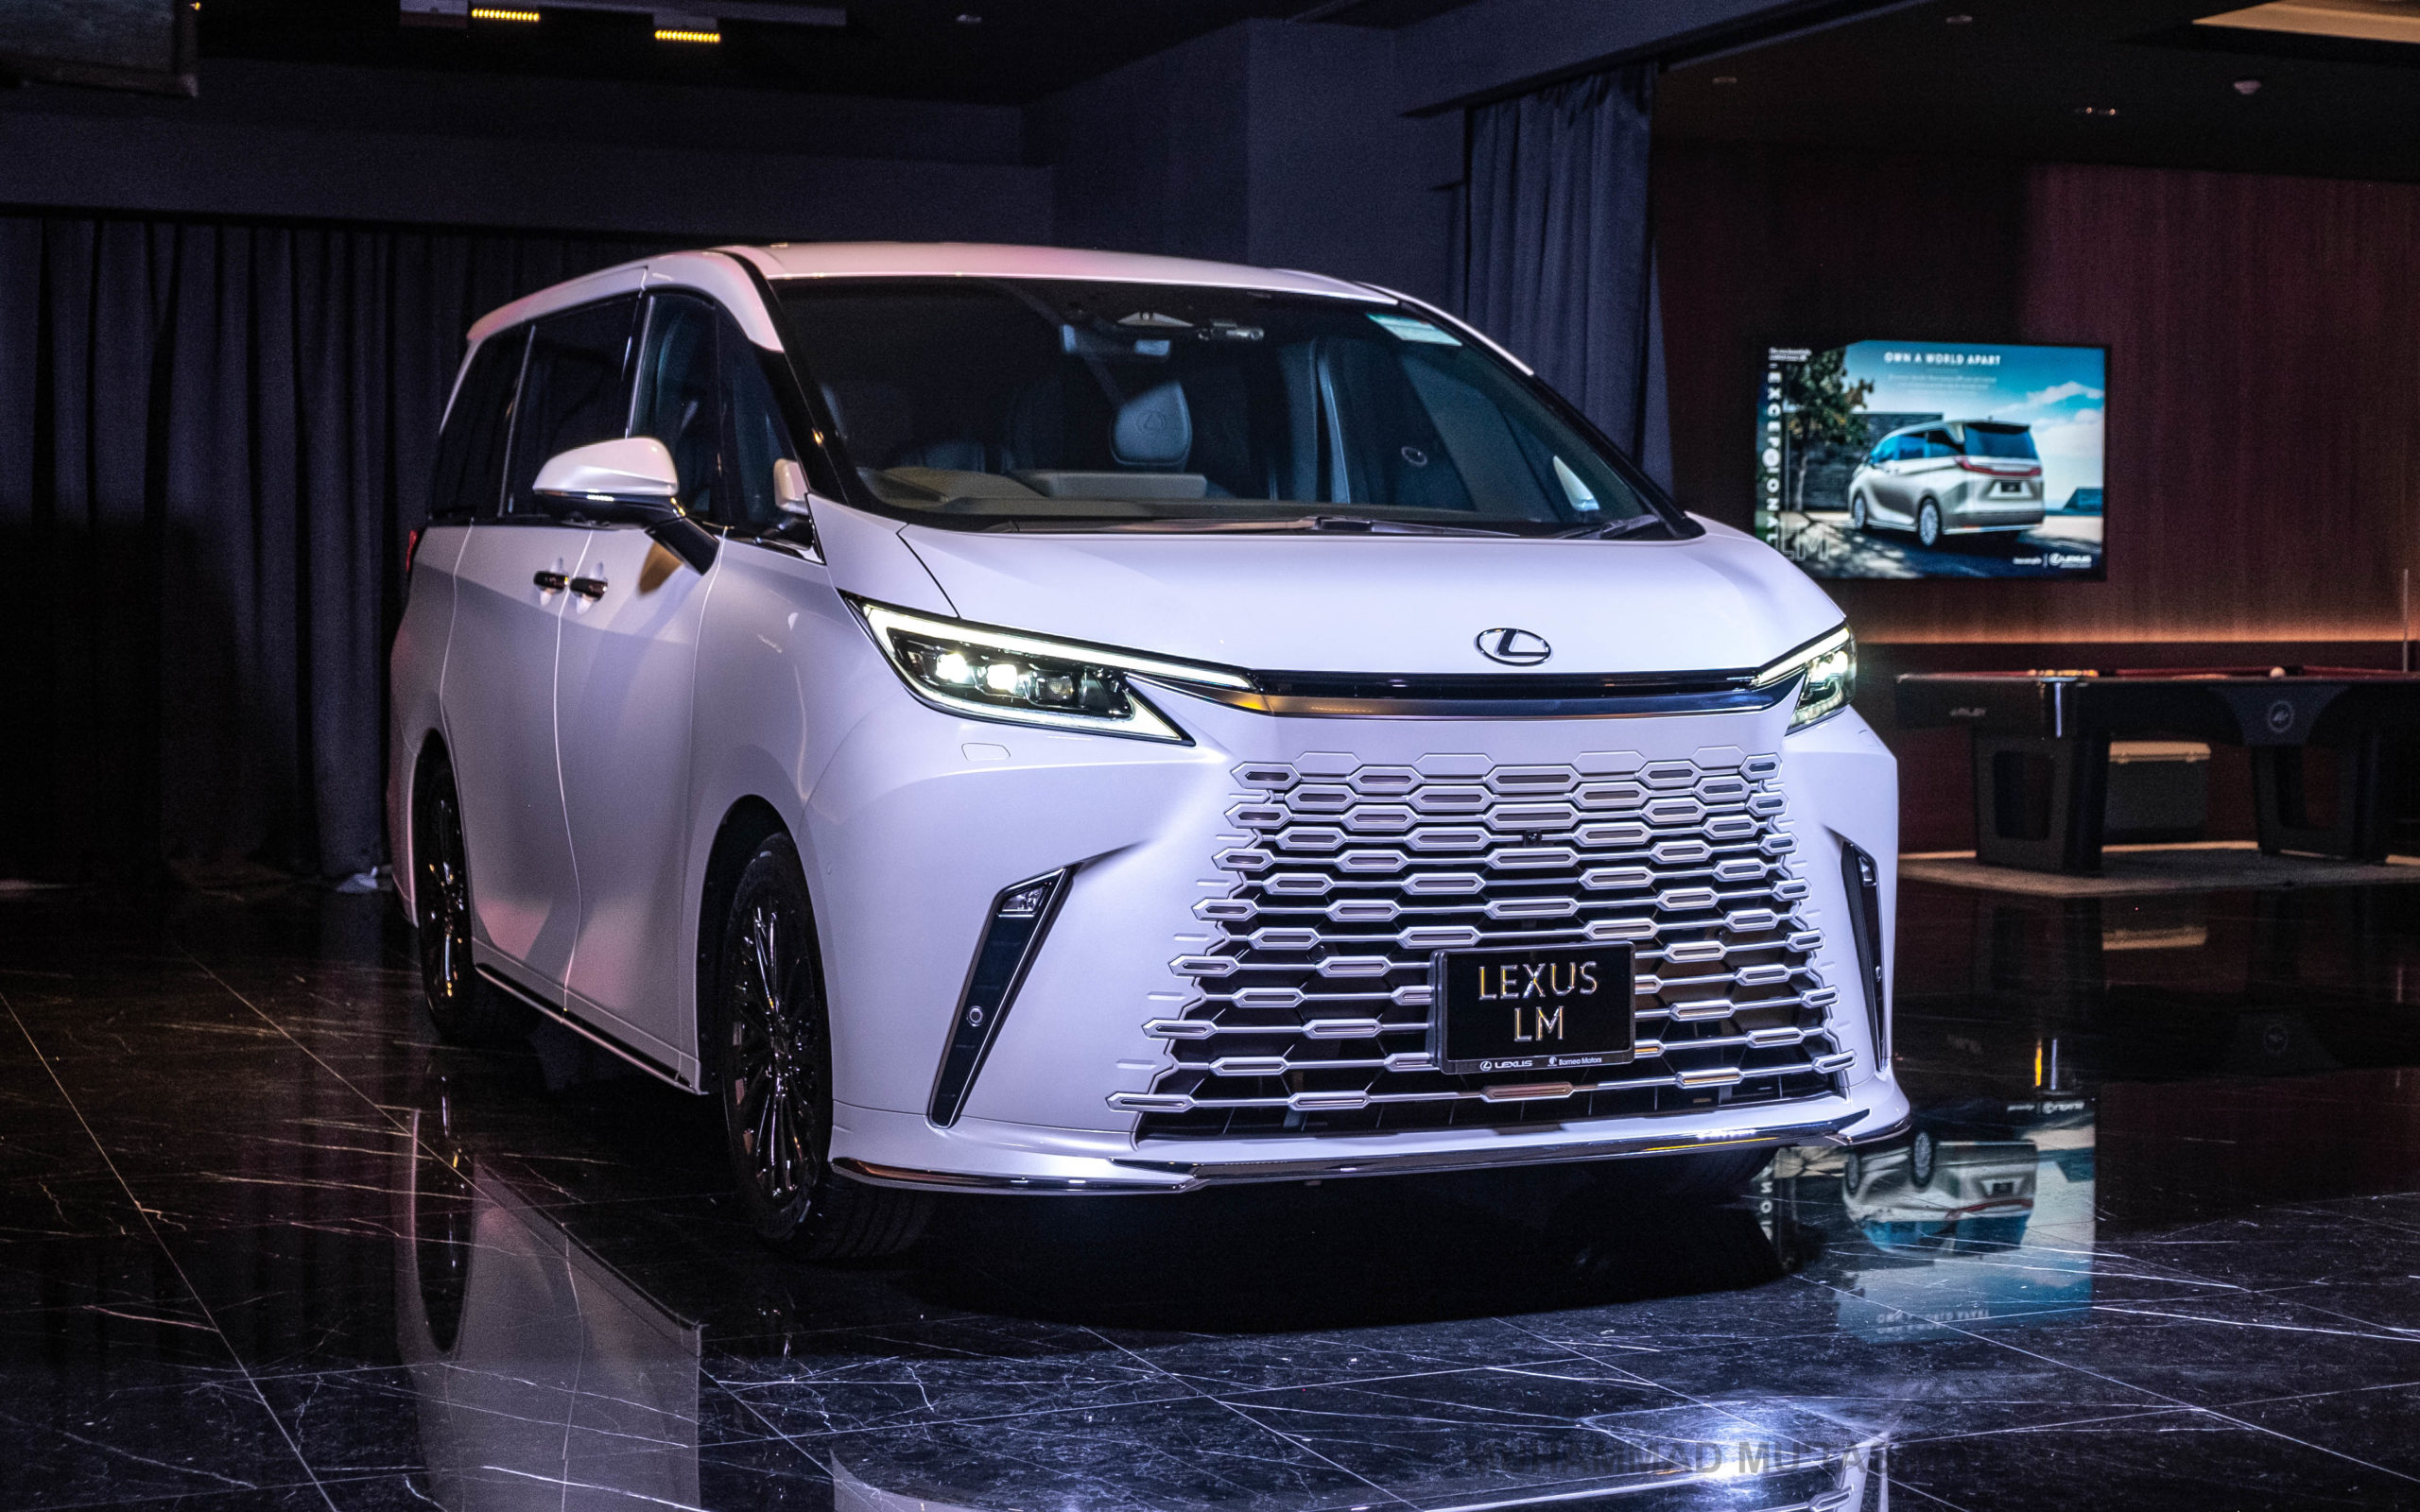 lexus lm rolls into town: because the toyota vellfire just ain't fancy enough